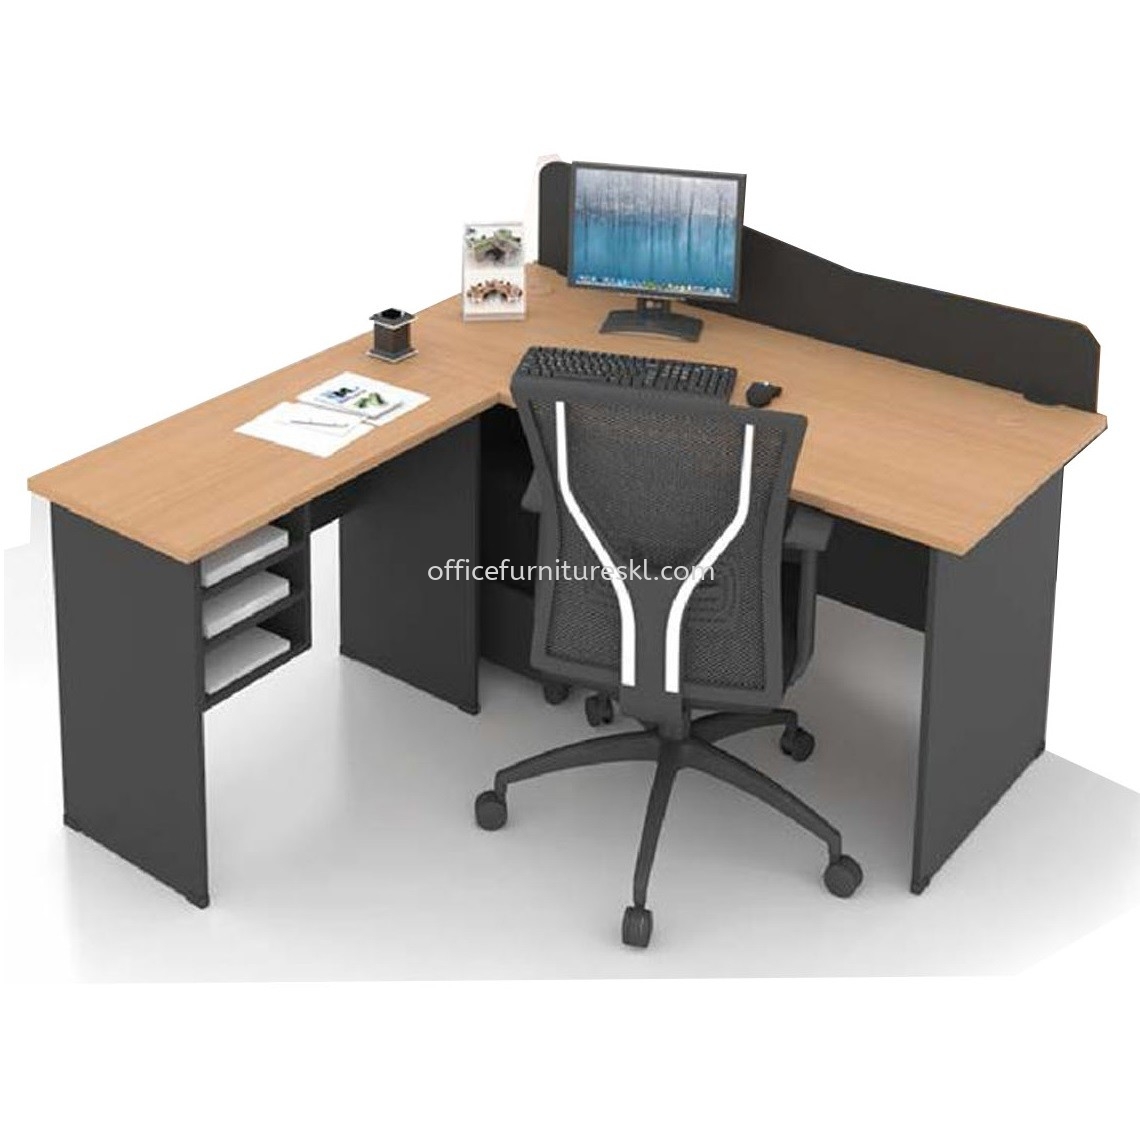 FOBIES 5 FEET OFFICE TABLE WITH PARTITION BOARD C/W SIDE TABLE & RETURN RACK SET - Office Table Batu Caves | Office Table Kepong | Office Table Serdang | Office Table Balakong